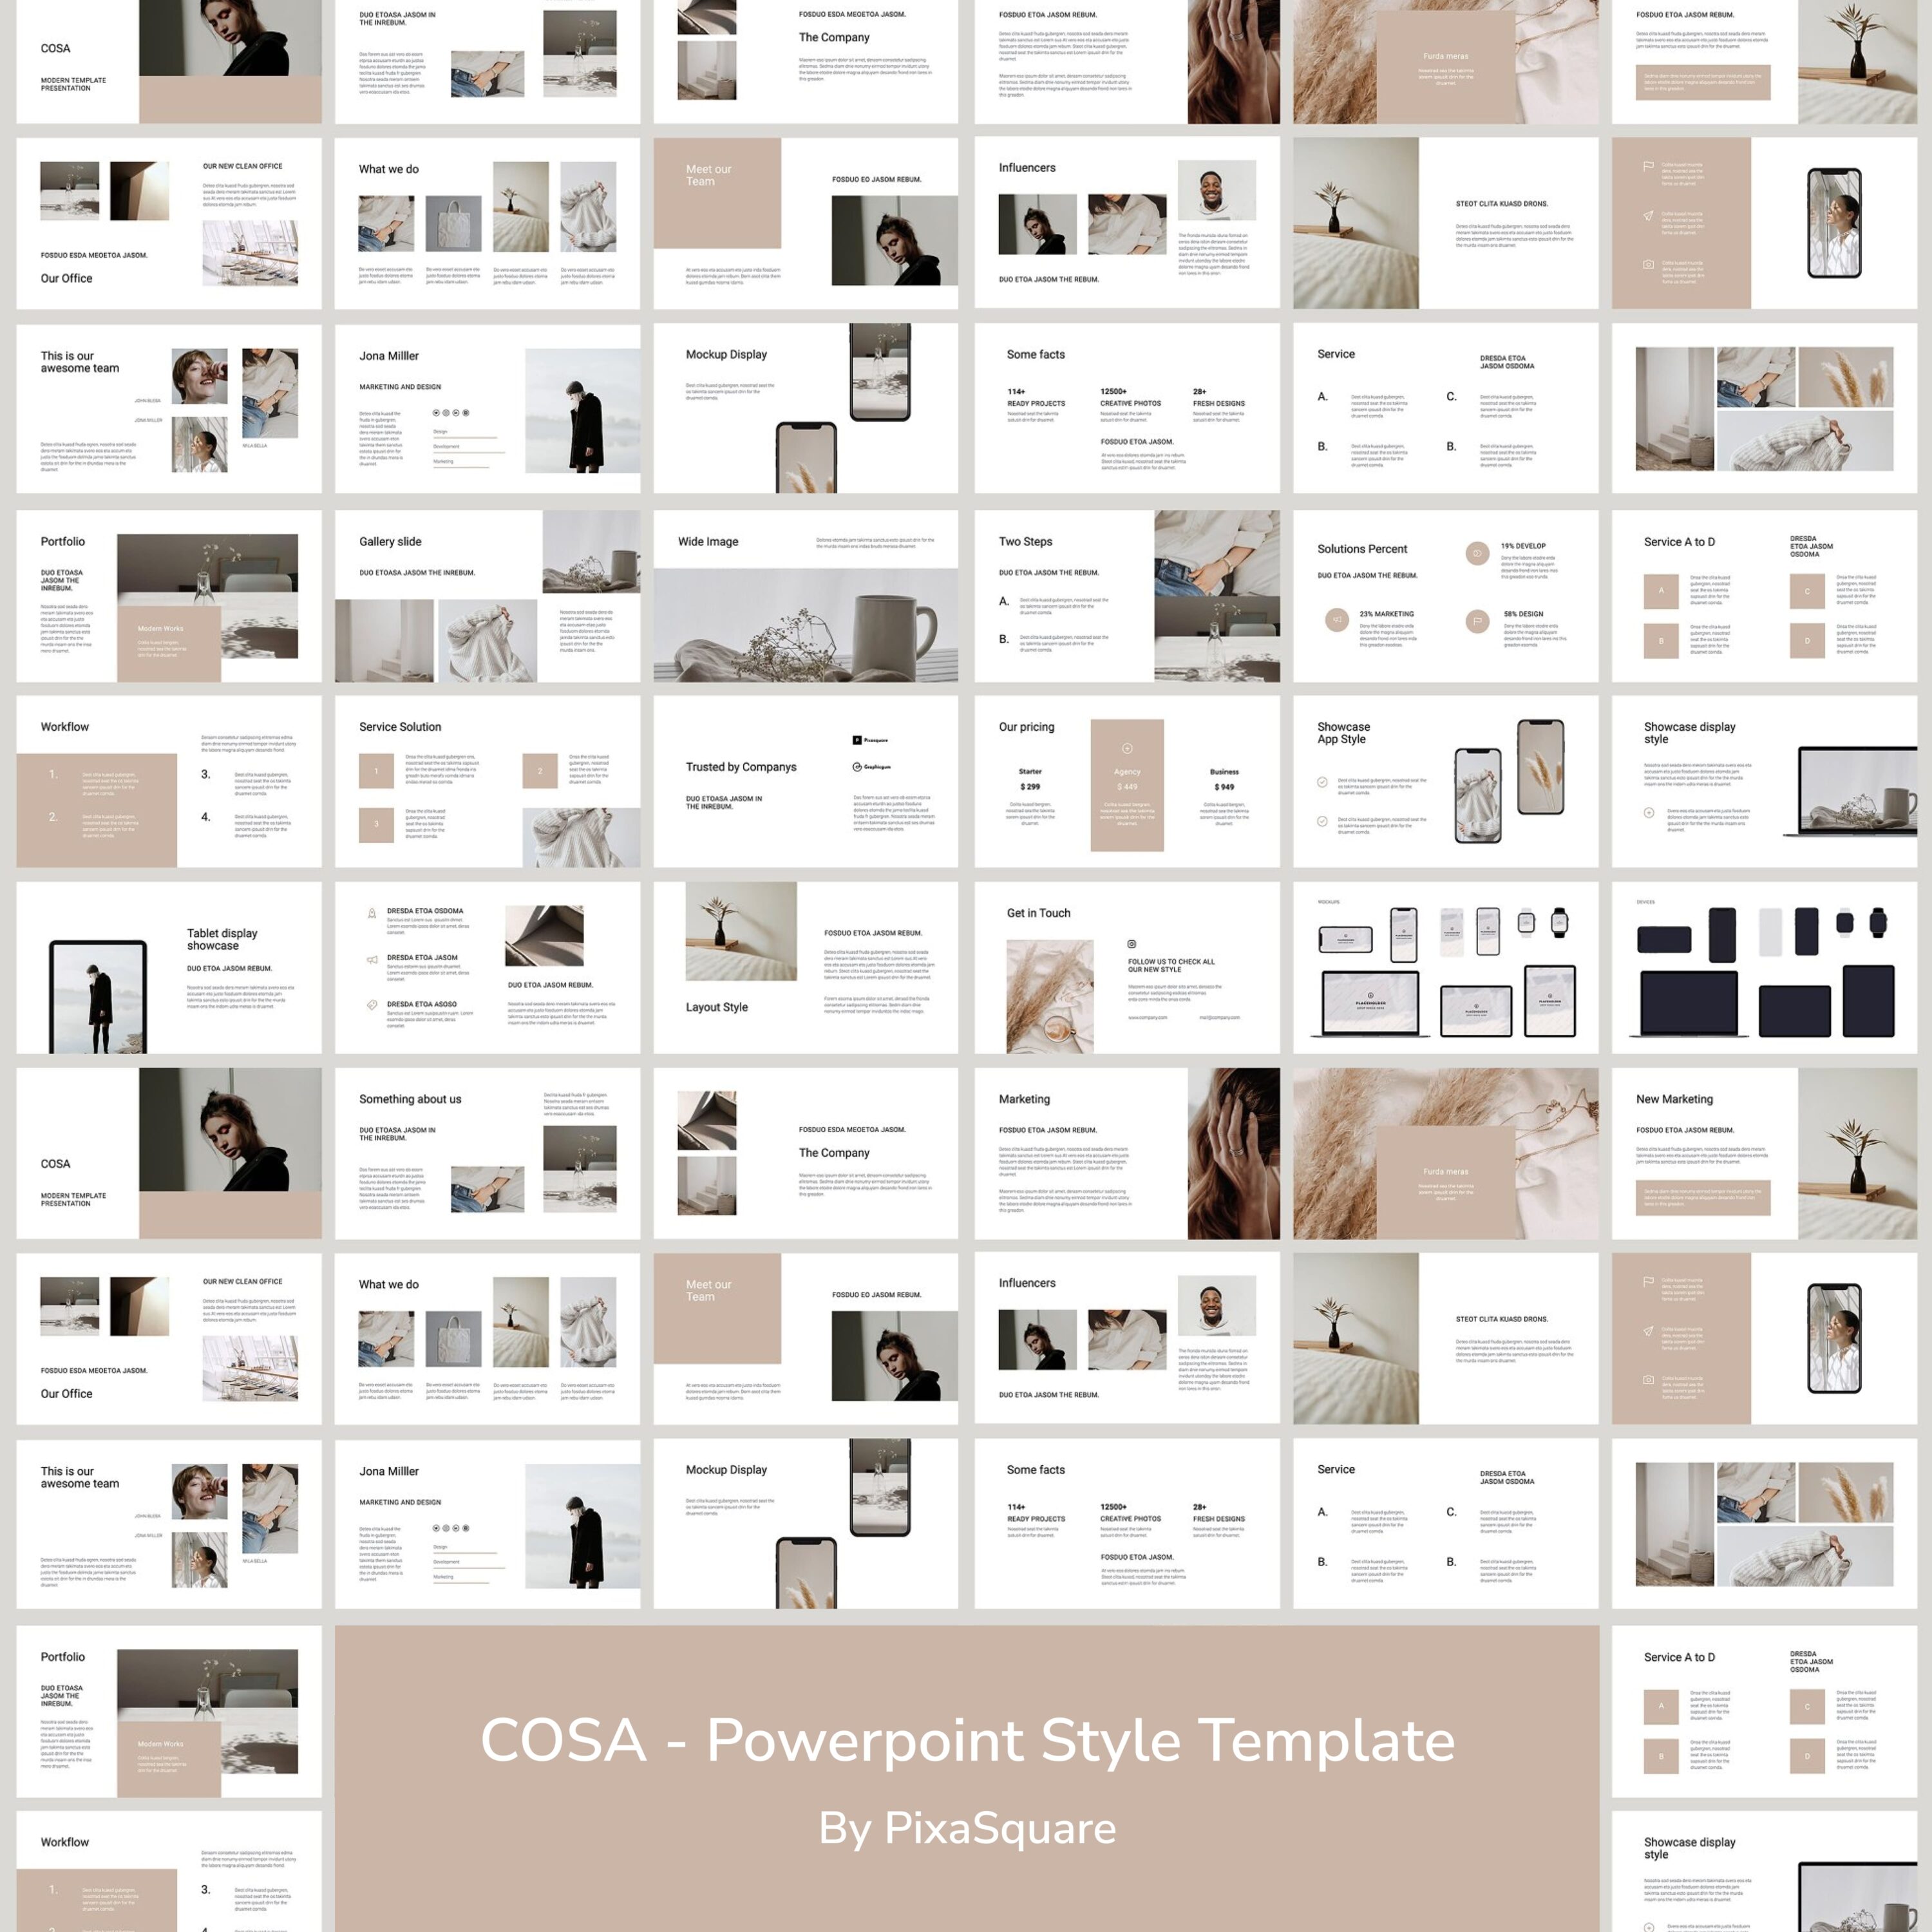 COSA - Powerpoint Style Template.